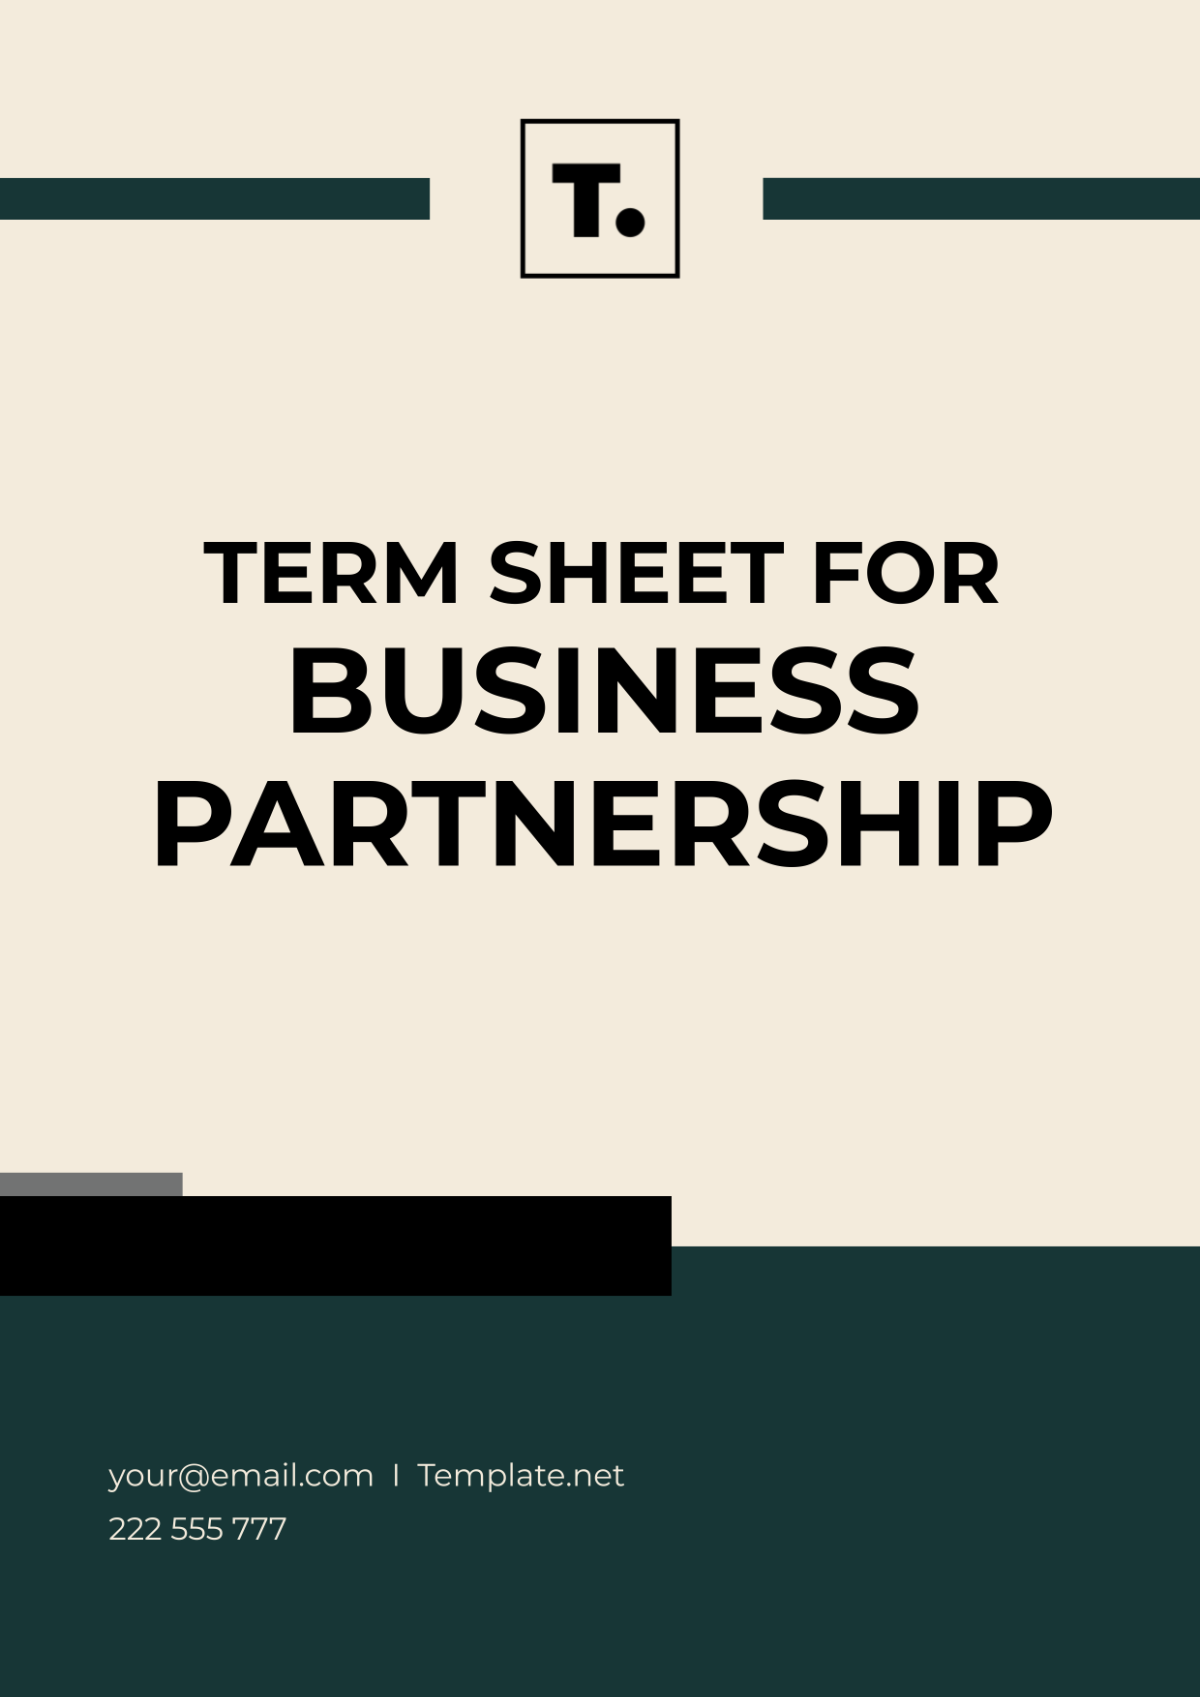 Free Term Sheet for Business Partnership Template